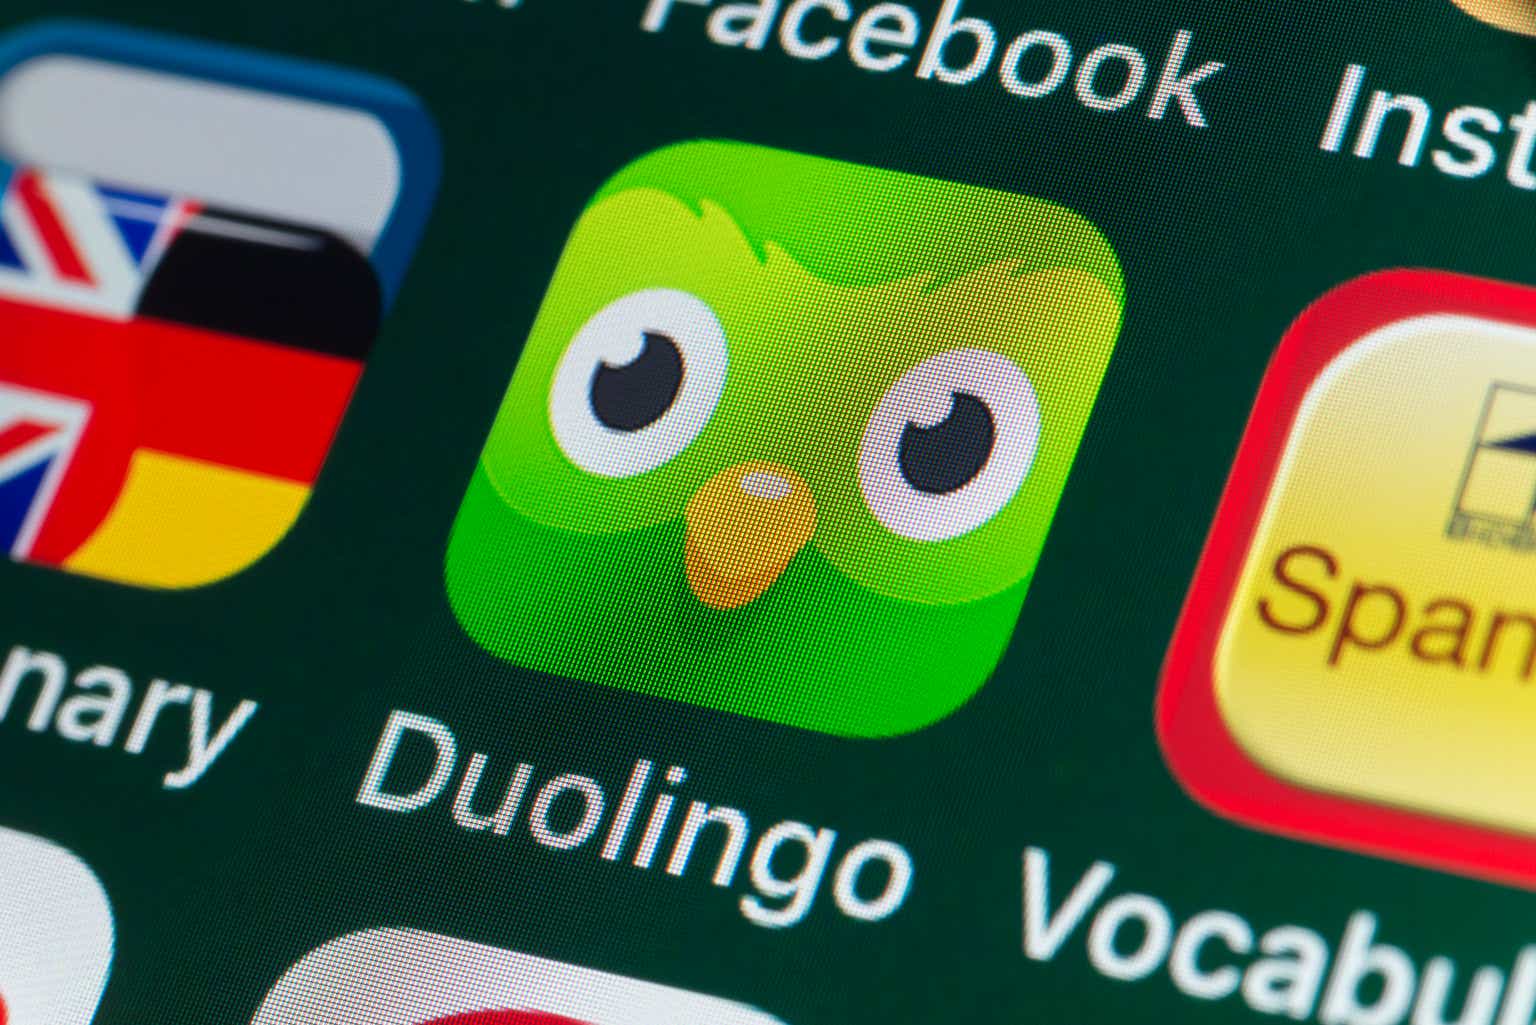 Duolingo Stock: One Of 2021’s Most Promising Internet IPOs (DUOL)